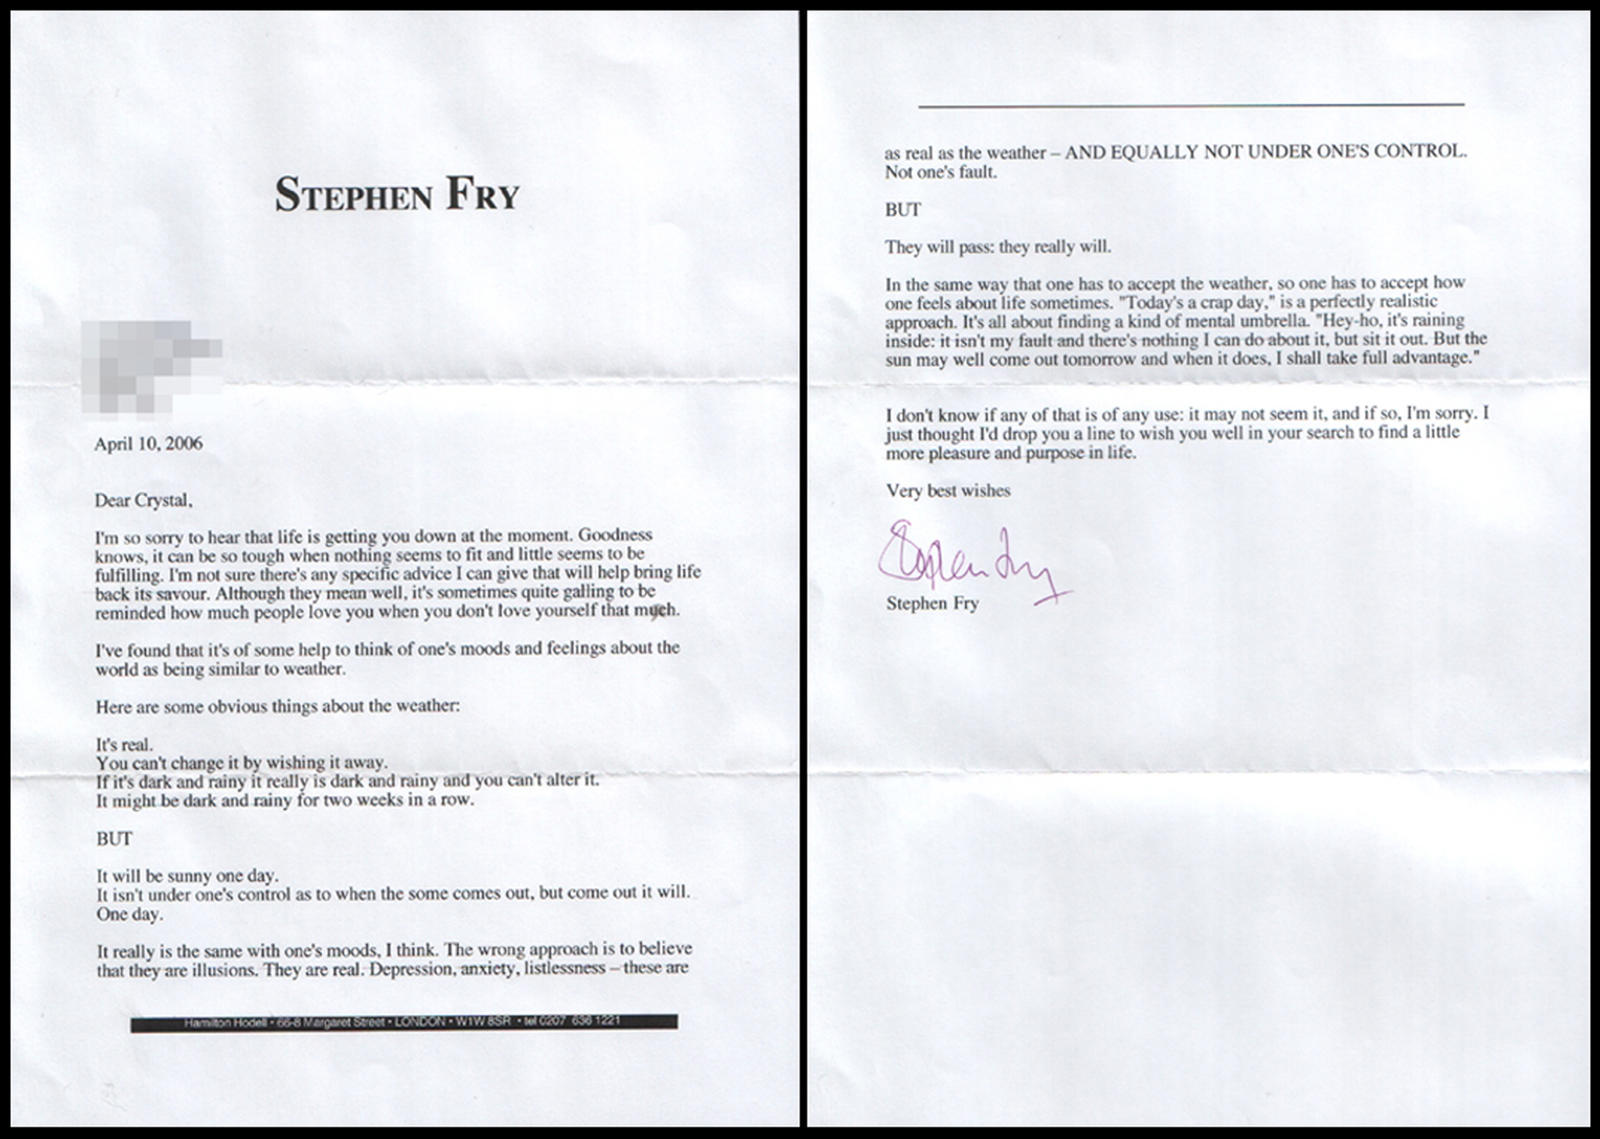 My letter from Stephen Fry